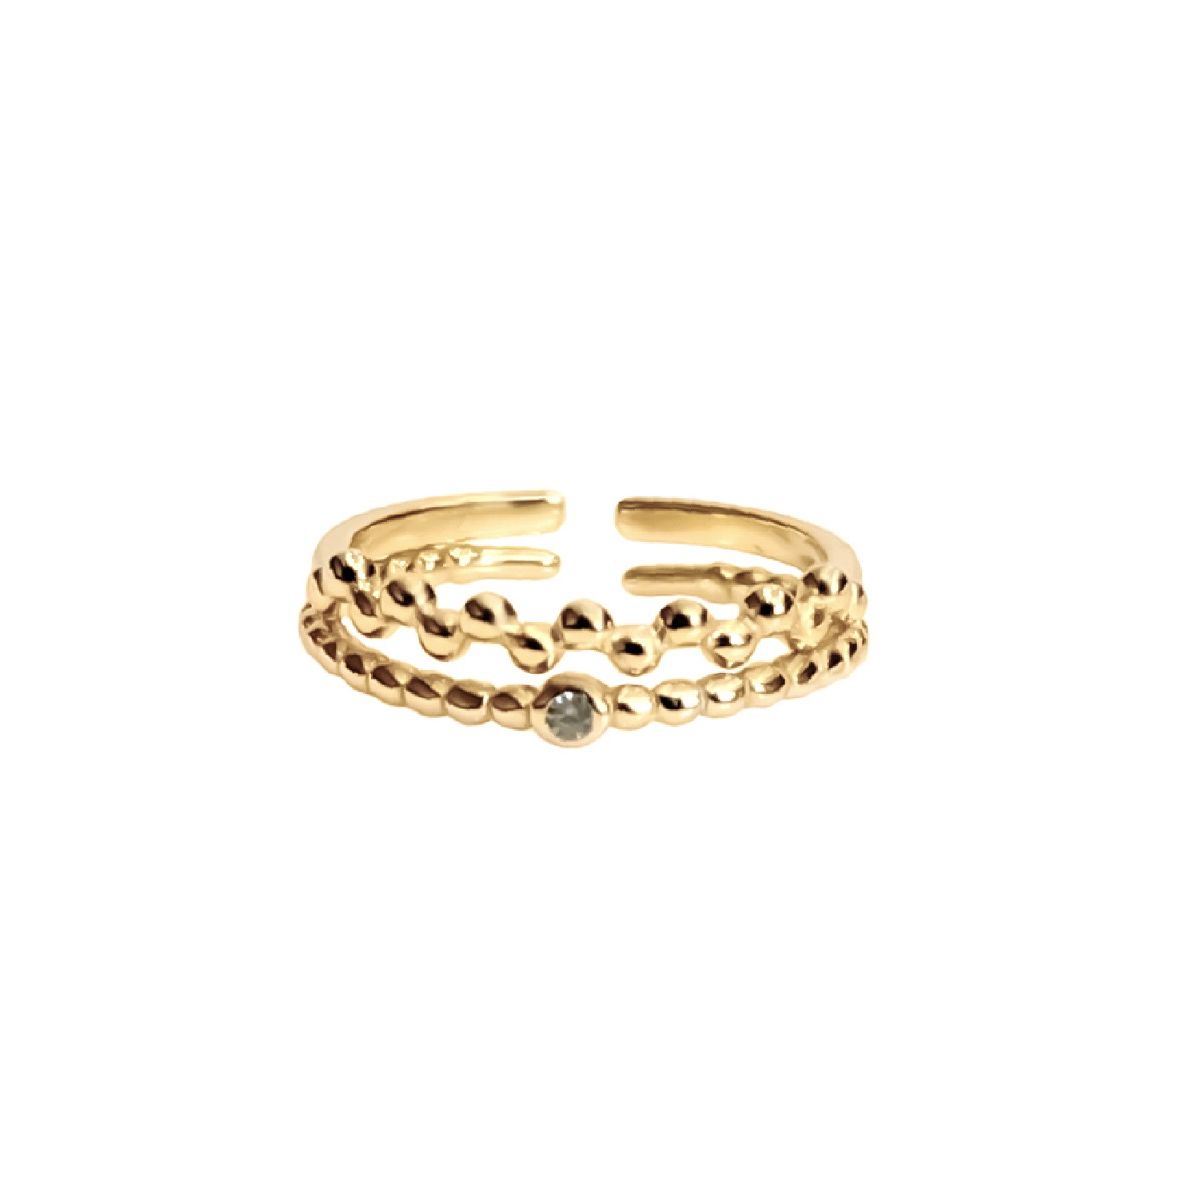 Annabella Pair of Rings in Gold